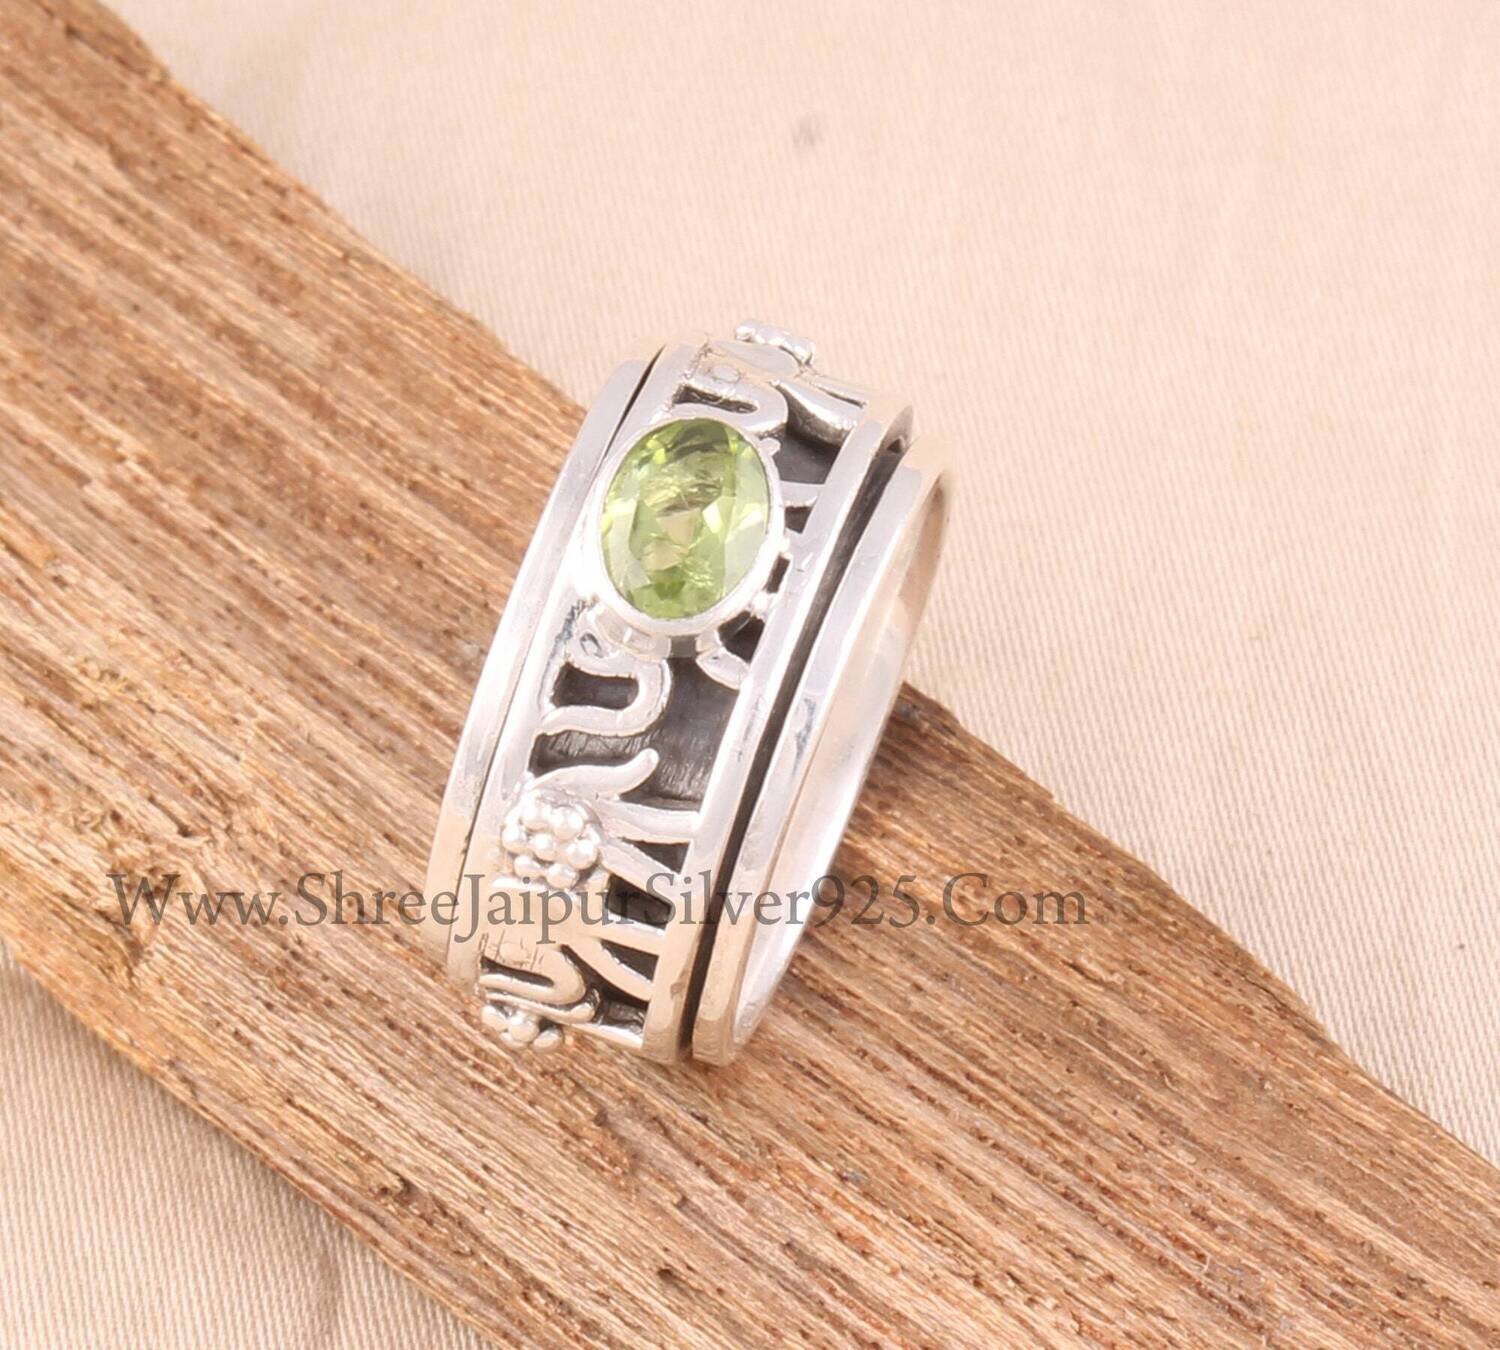 Natural Peridot Oval Cut Gemstone Solid 925 Sterling Silver Elephant Spinner Ring For Women, Handmade Band Anxiety Fidget Ring Gifts For Her